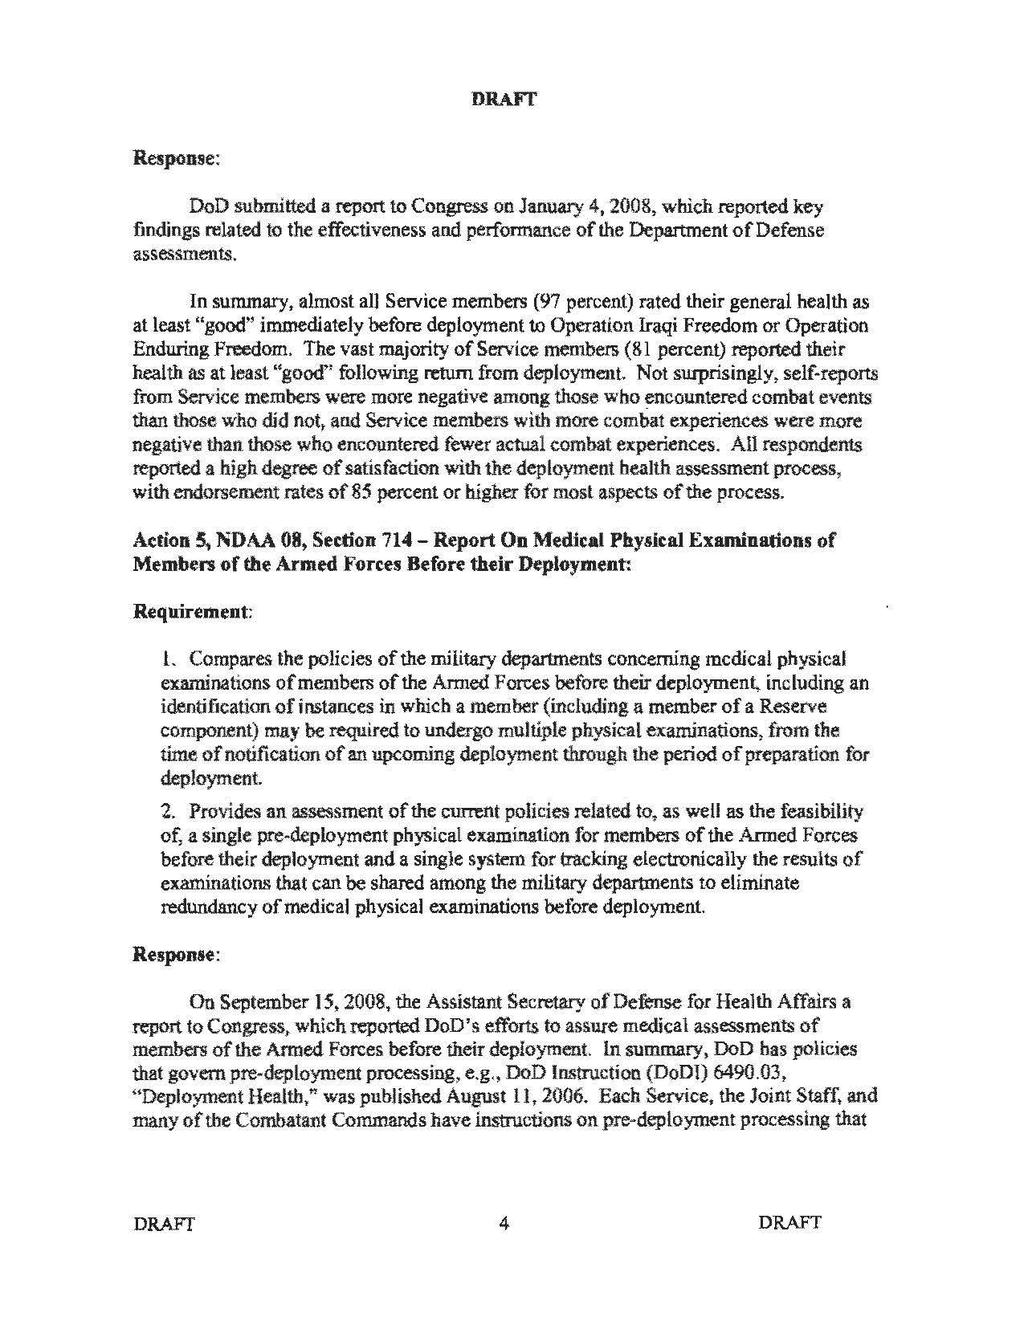 DRAFT Response: DoD submitted a report to Congress on January 4, 2008, which reported key findings related to the effectiveness and performance ofthe Department ofdefense assessments.